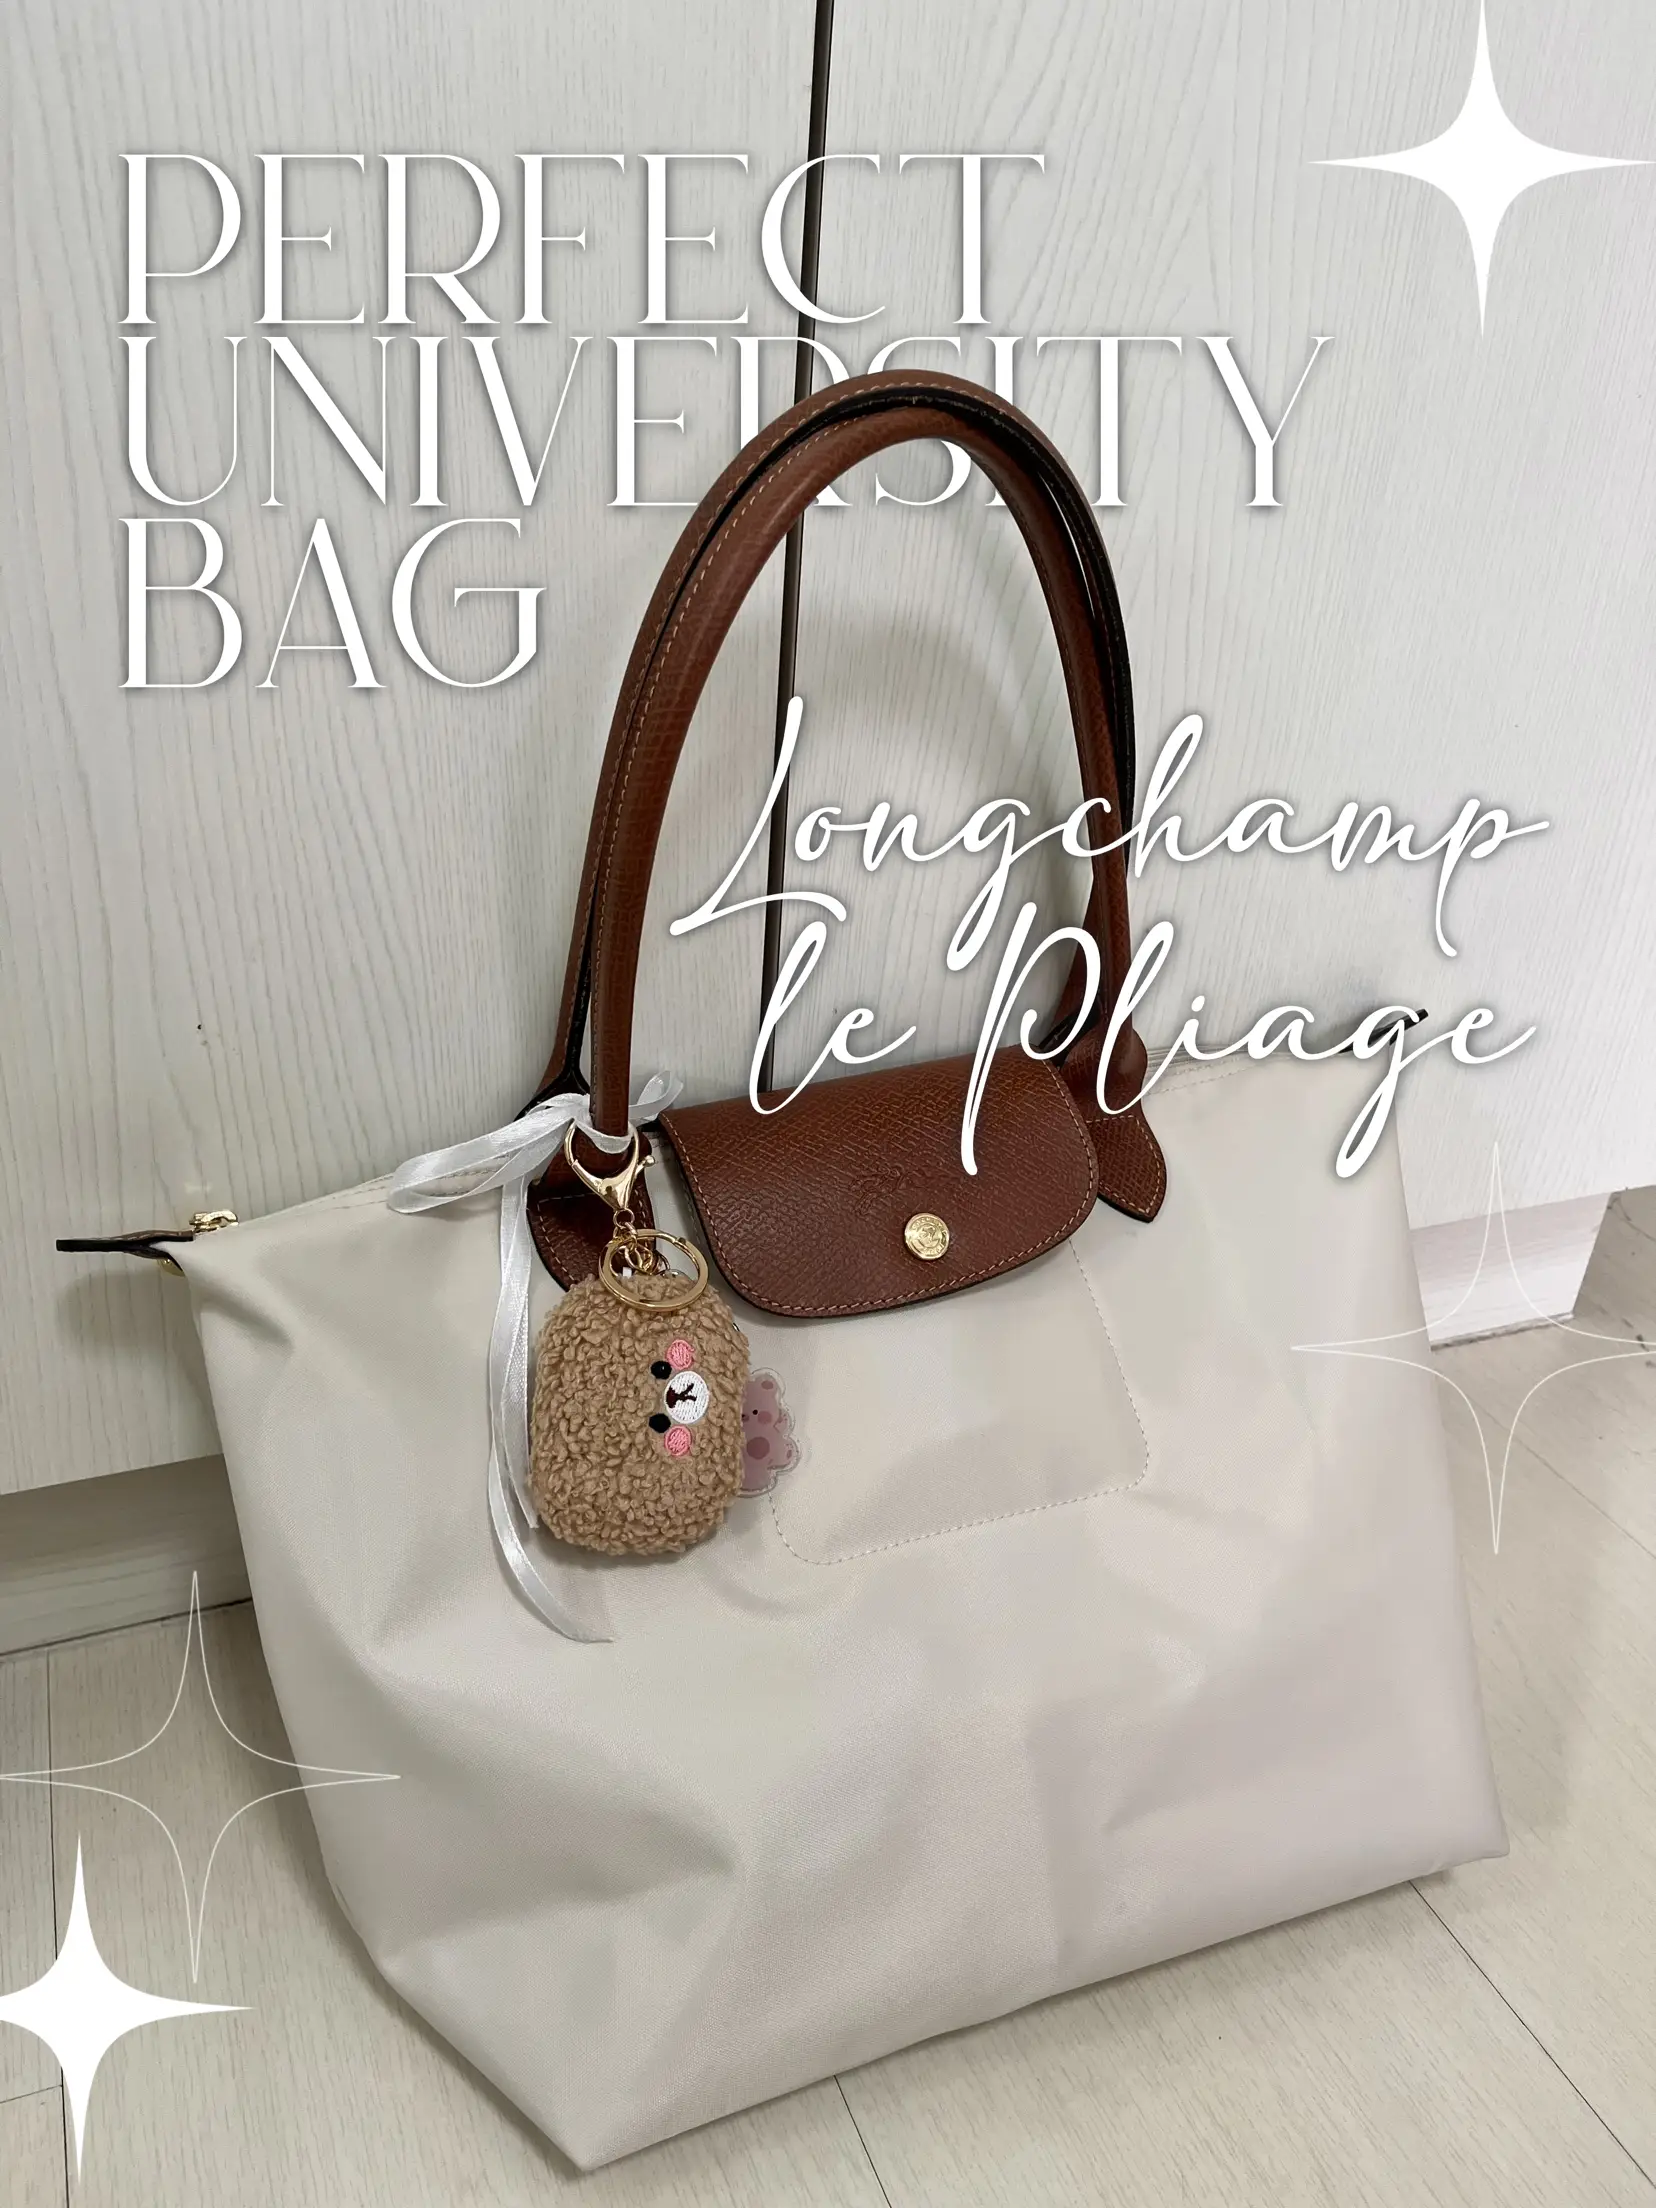 perfect size for daily bag 🫶🏻 #unboxingbag #longchamplepliage